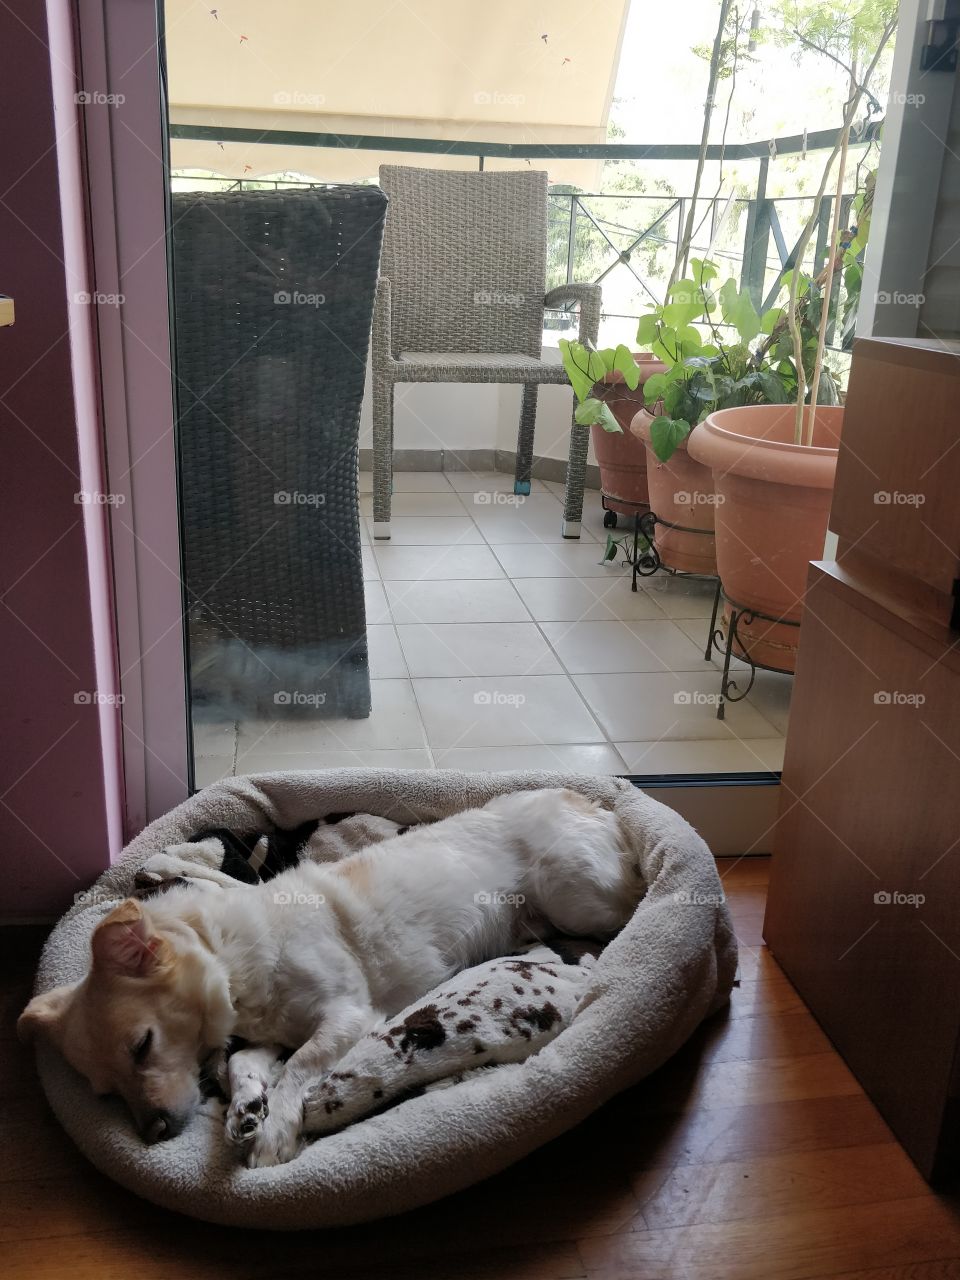 Sweet dog sleeping in his bed in the bedroom with balcony view on the outside